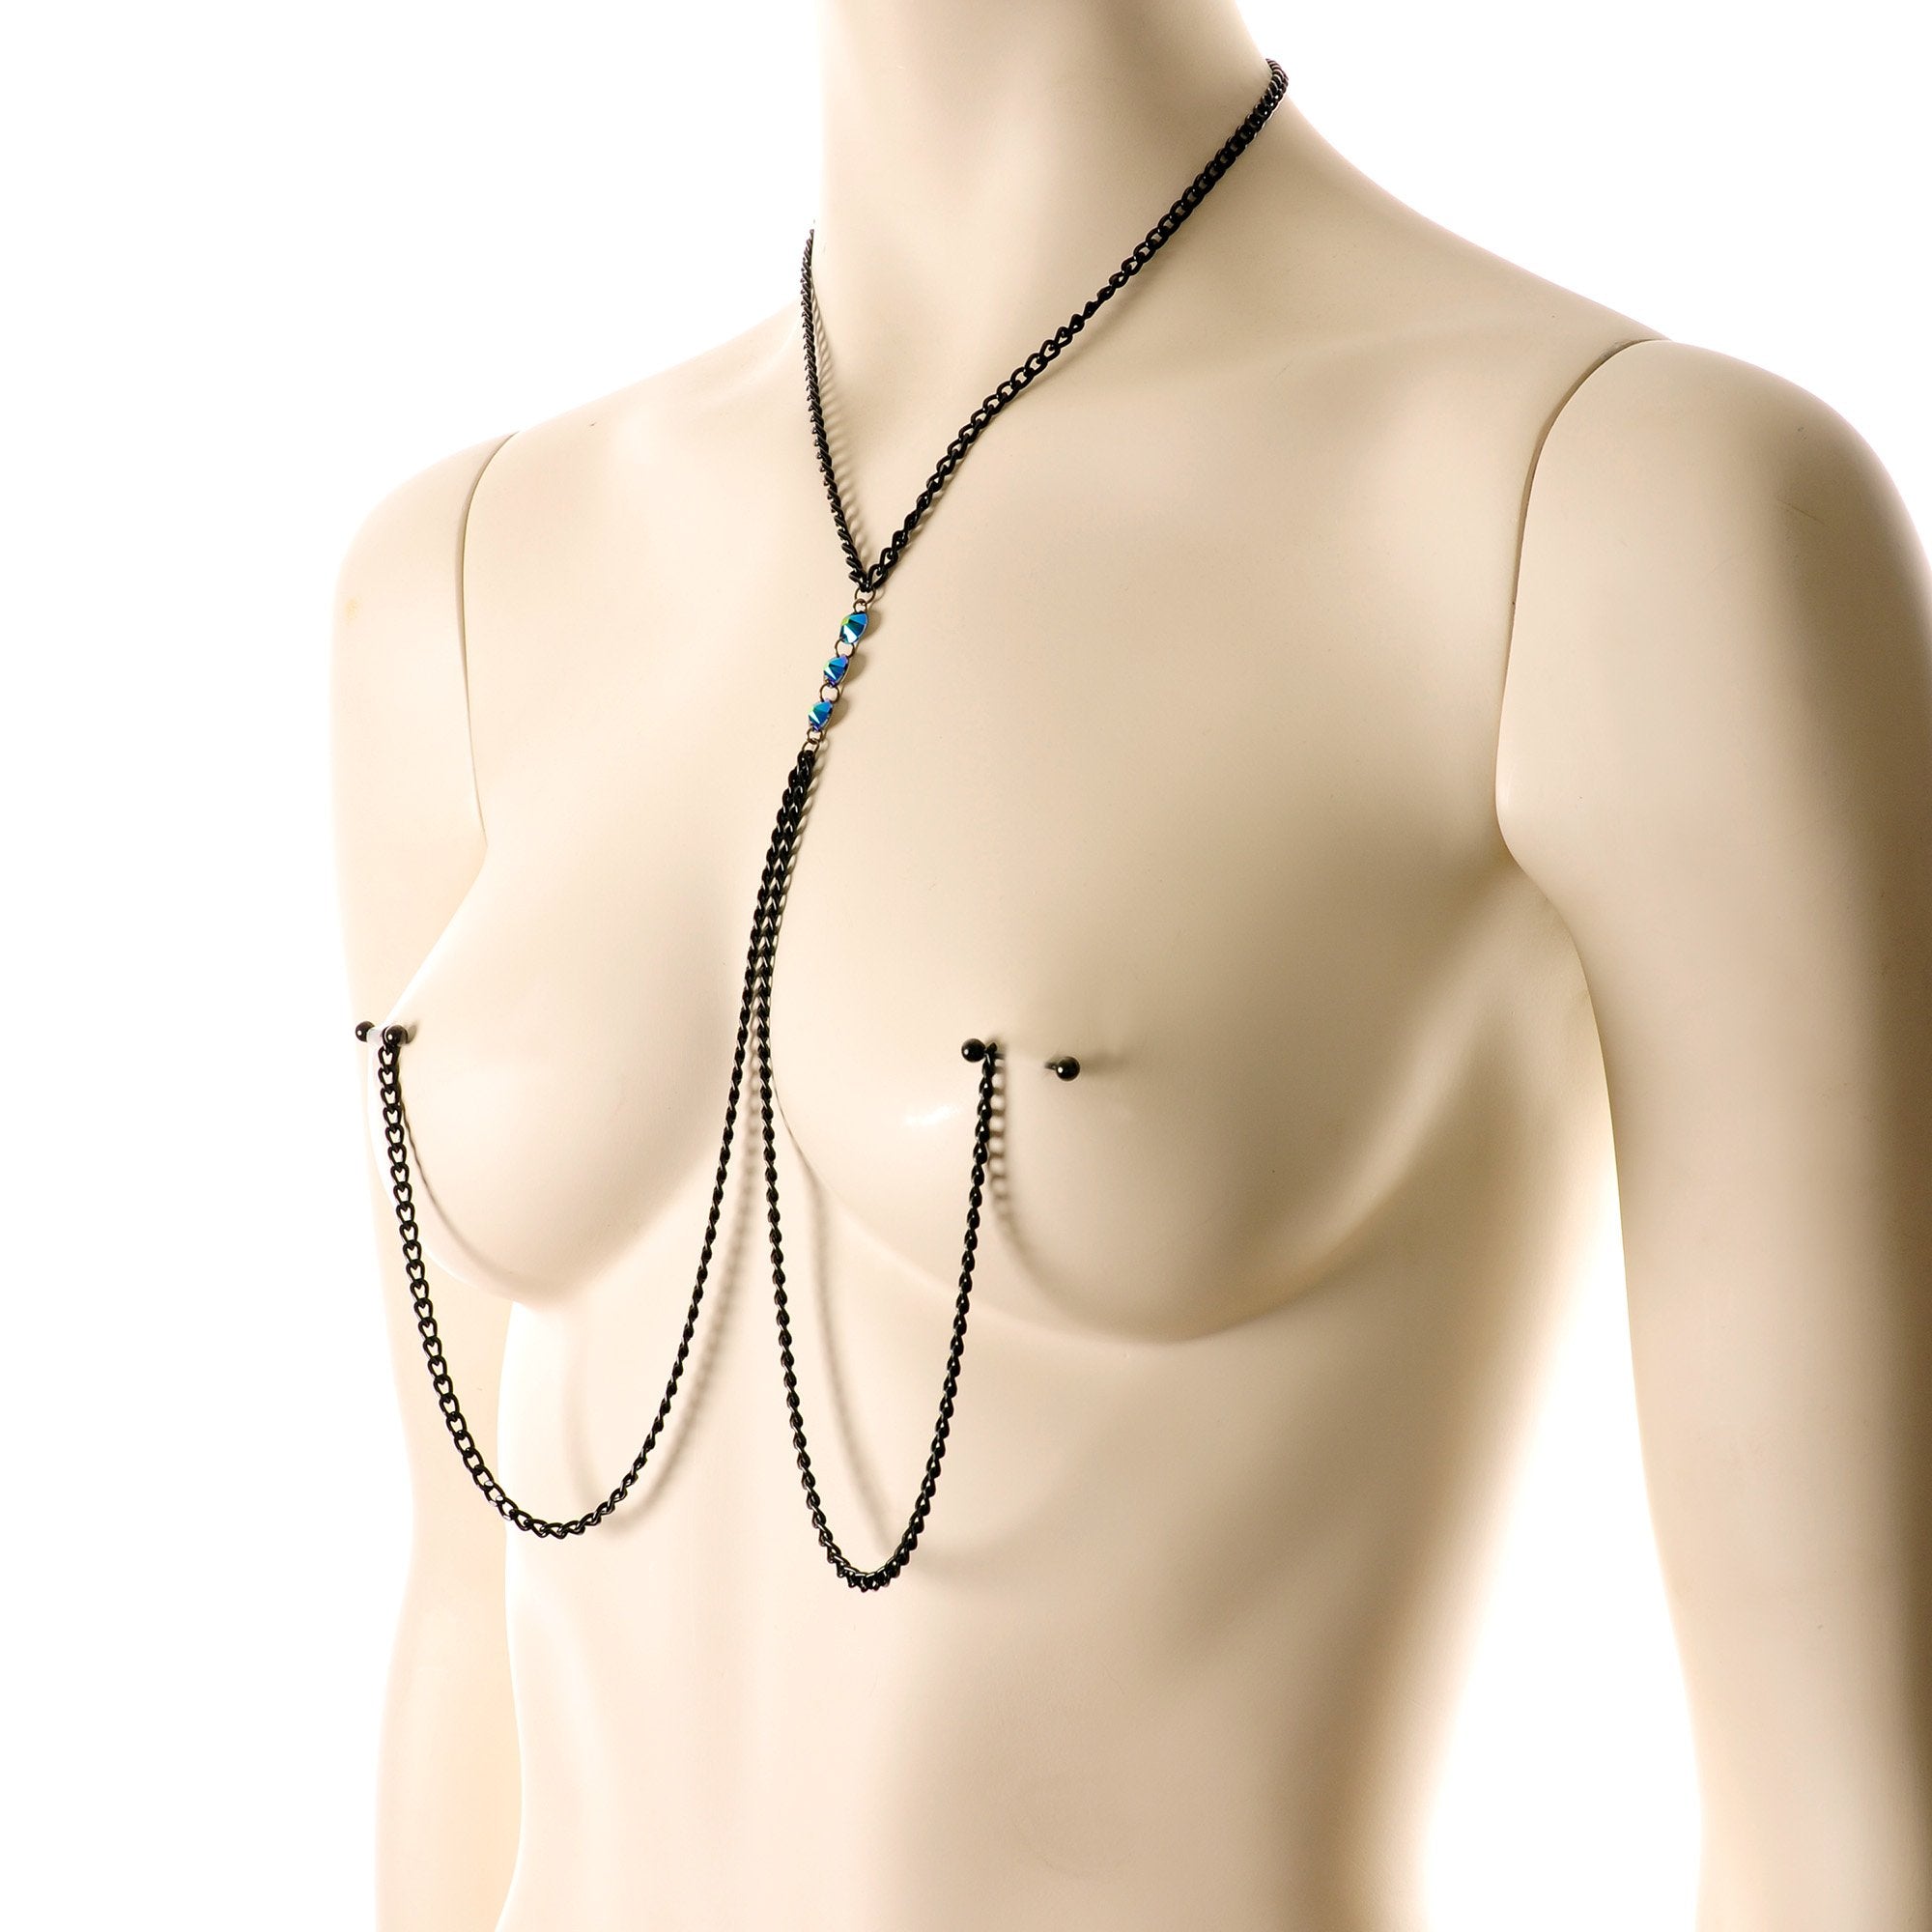 Gothic Black Necklace to Nipple Chain Created with Crystals